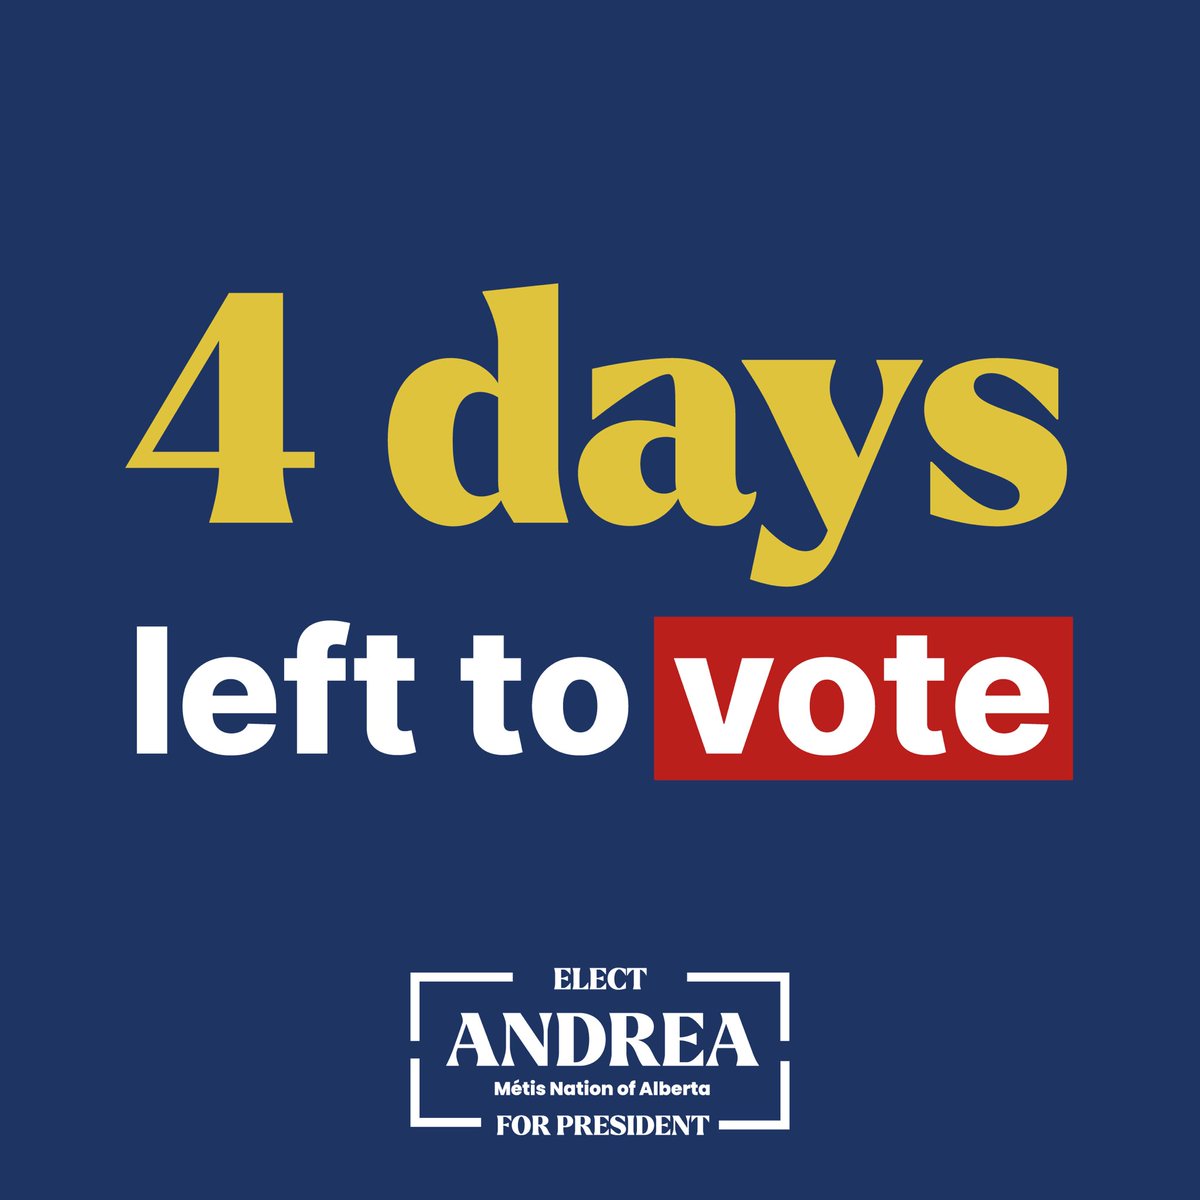 There are 4 days left to vote in the Otipemisiwak Métis Government election!   Vote to turn your dreams, and the dreams of our ancestors, into reality.   Learn where and how to vote by visiting metiselectionsab.com